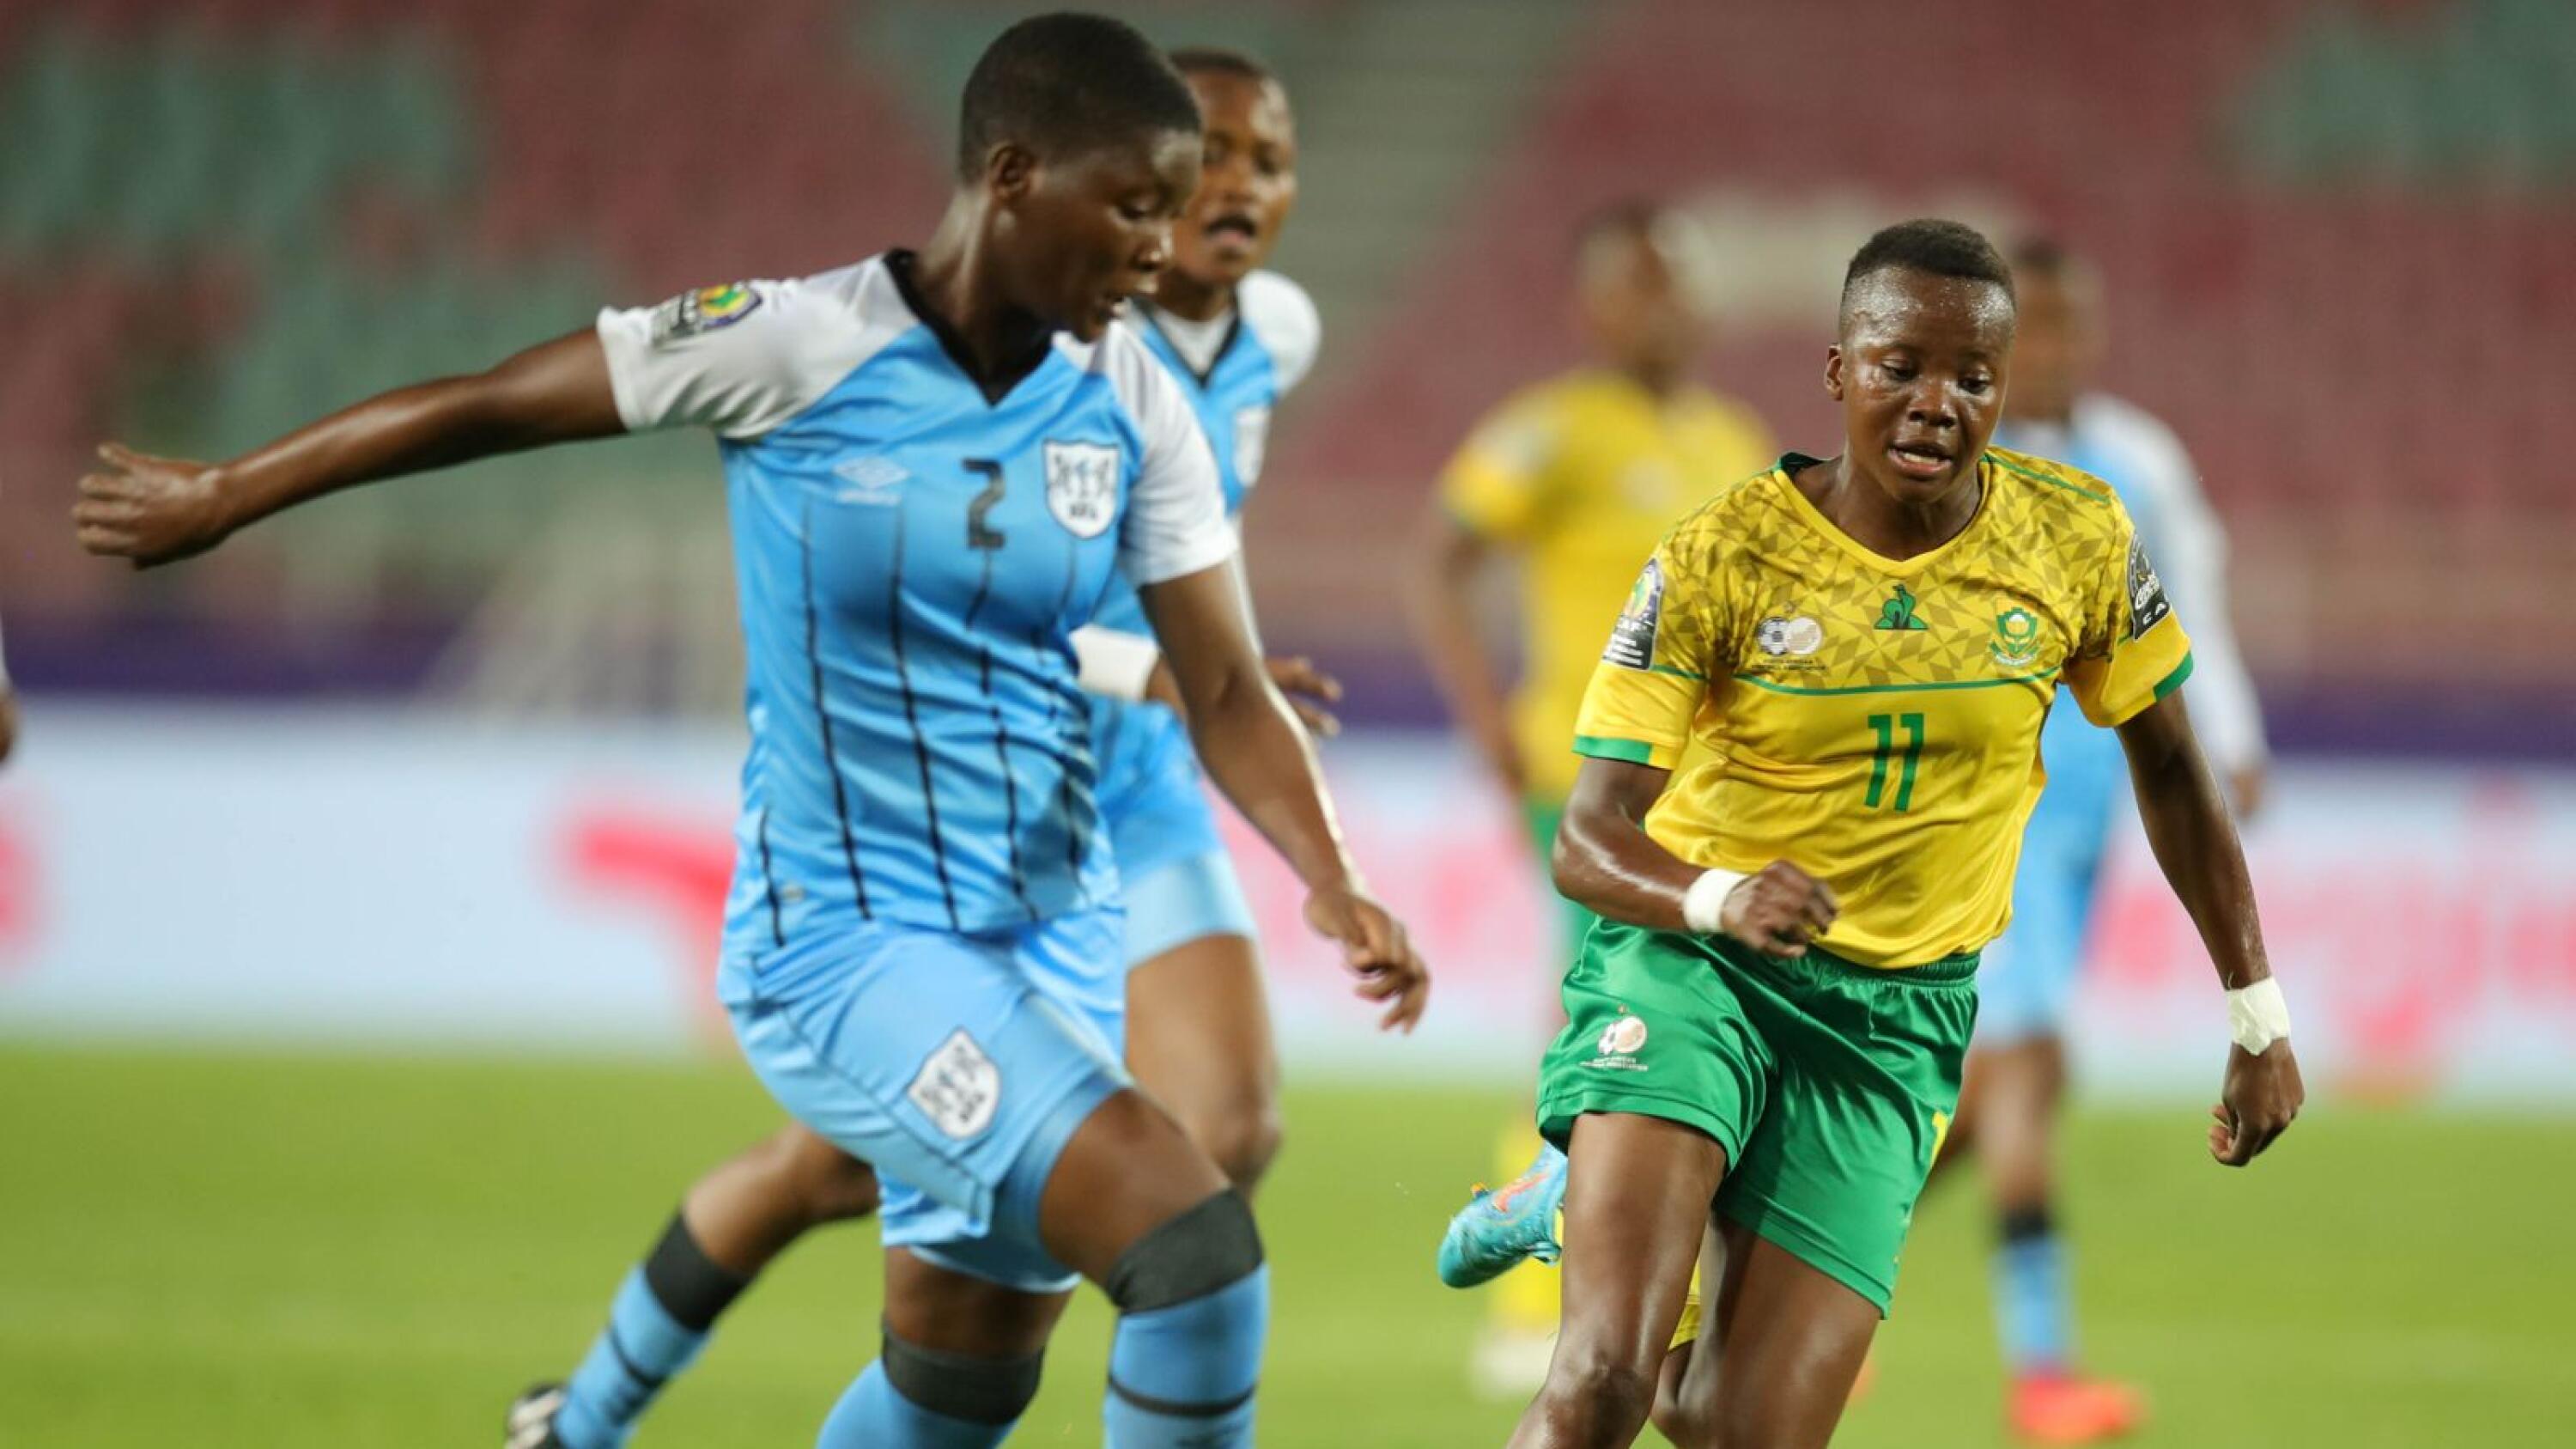 Chrestinah Thembi Kgatlana of South Africa challenged by Kesegofetse Mochawe of Botswana during the 2022 Women’s Africa Cup of Nations match at Prince Moulay Abdellah Stadium, Rabat